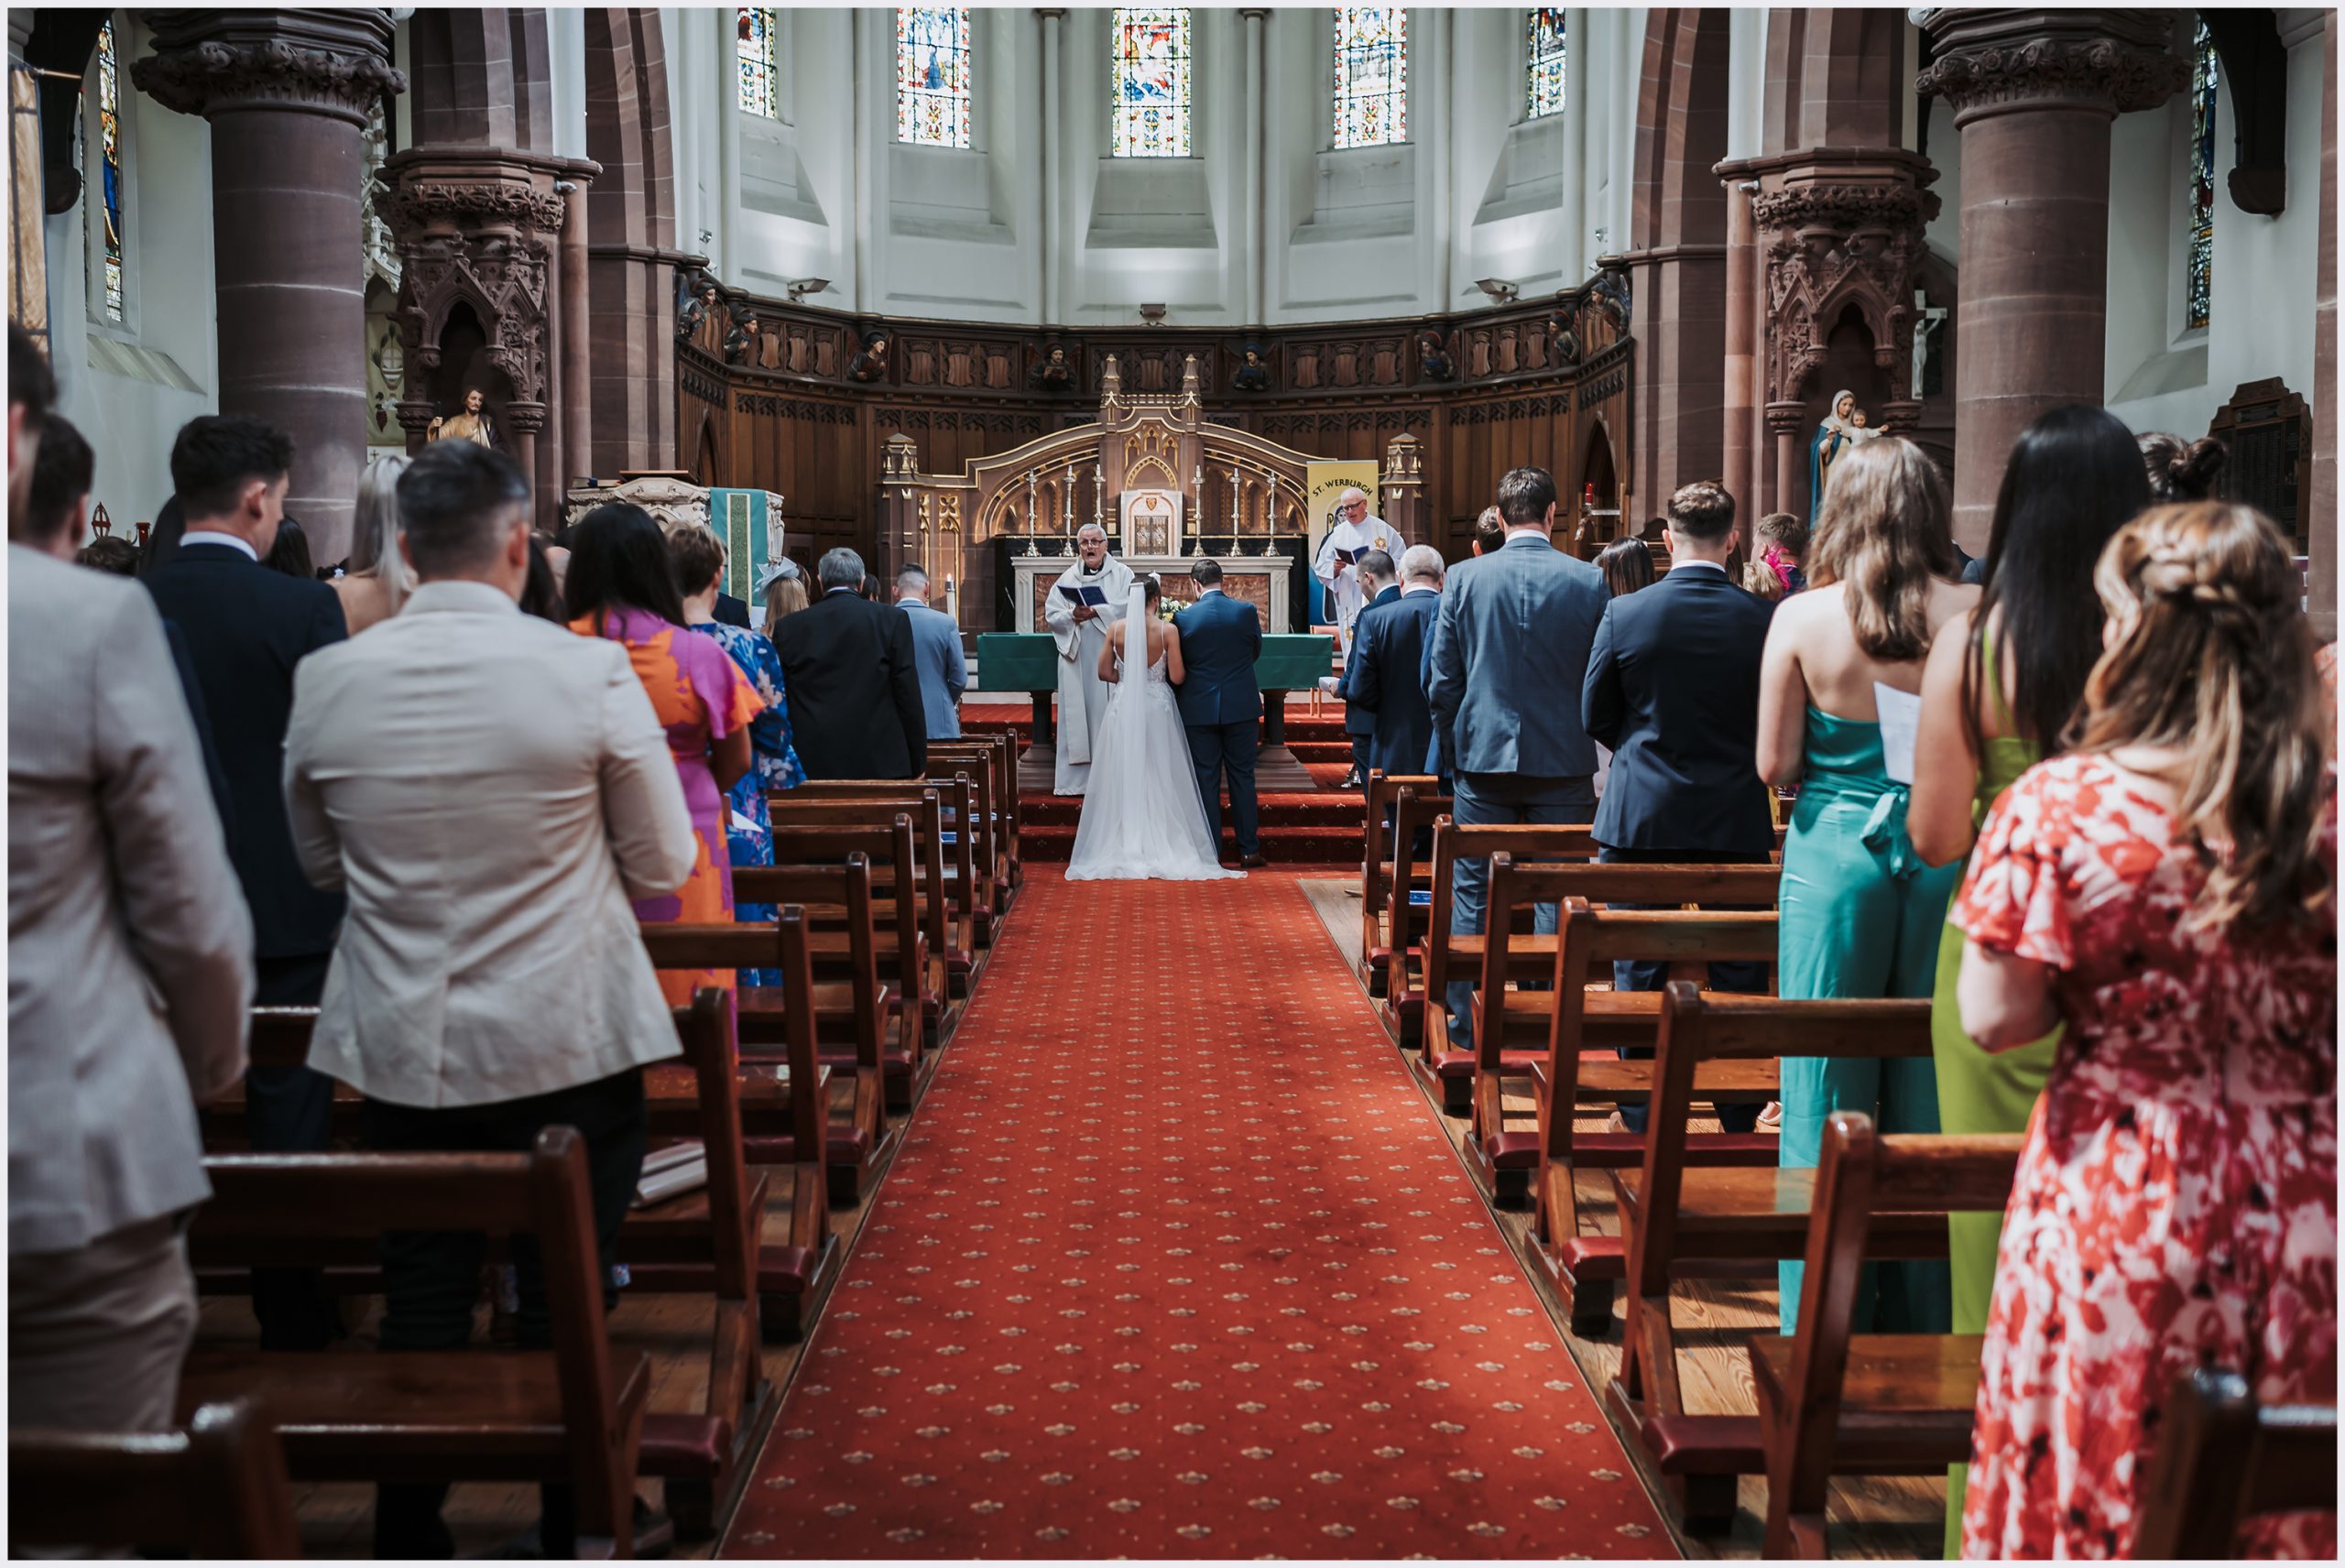 The length of an aisle in a church with the bride and groom standing at the top of it during their wedding ceremony.